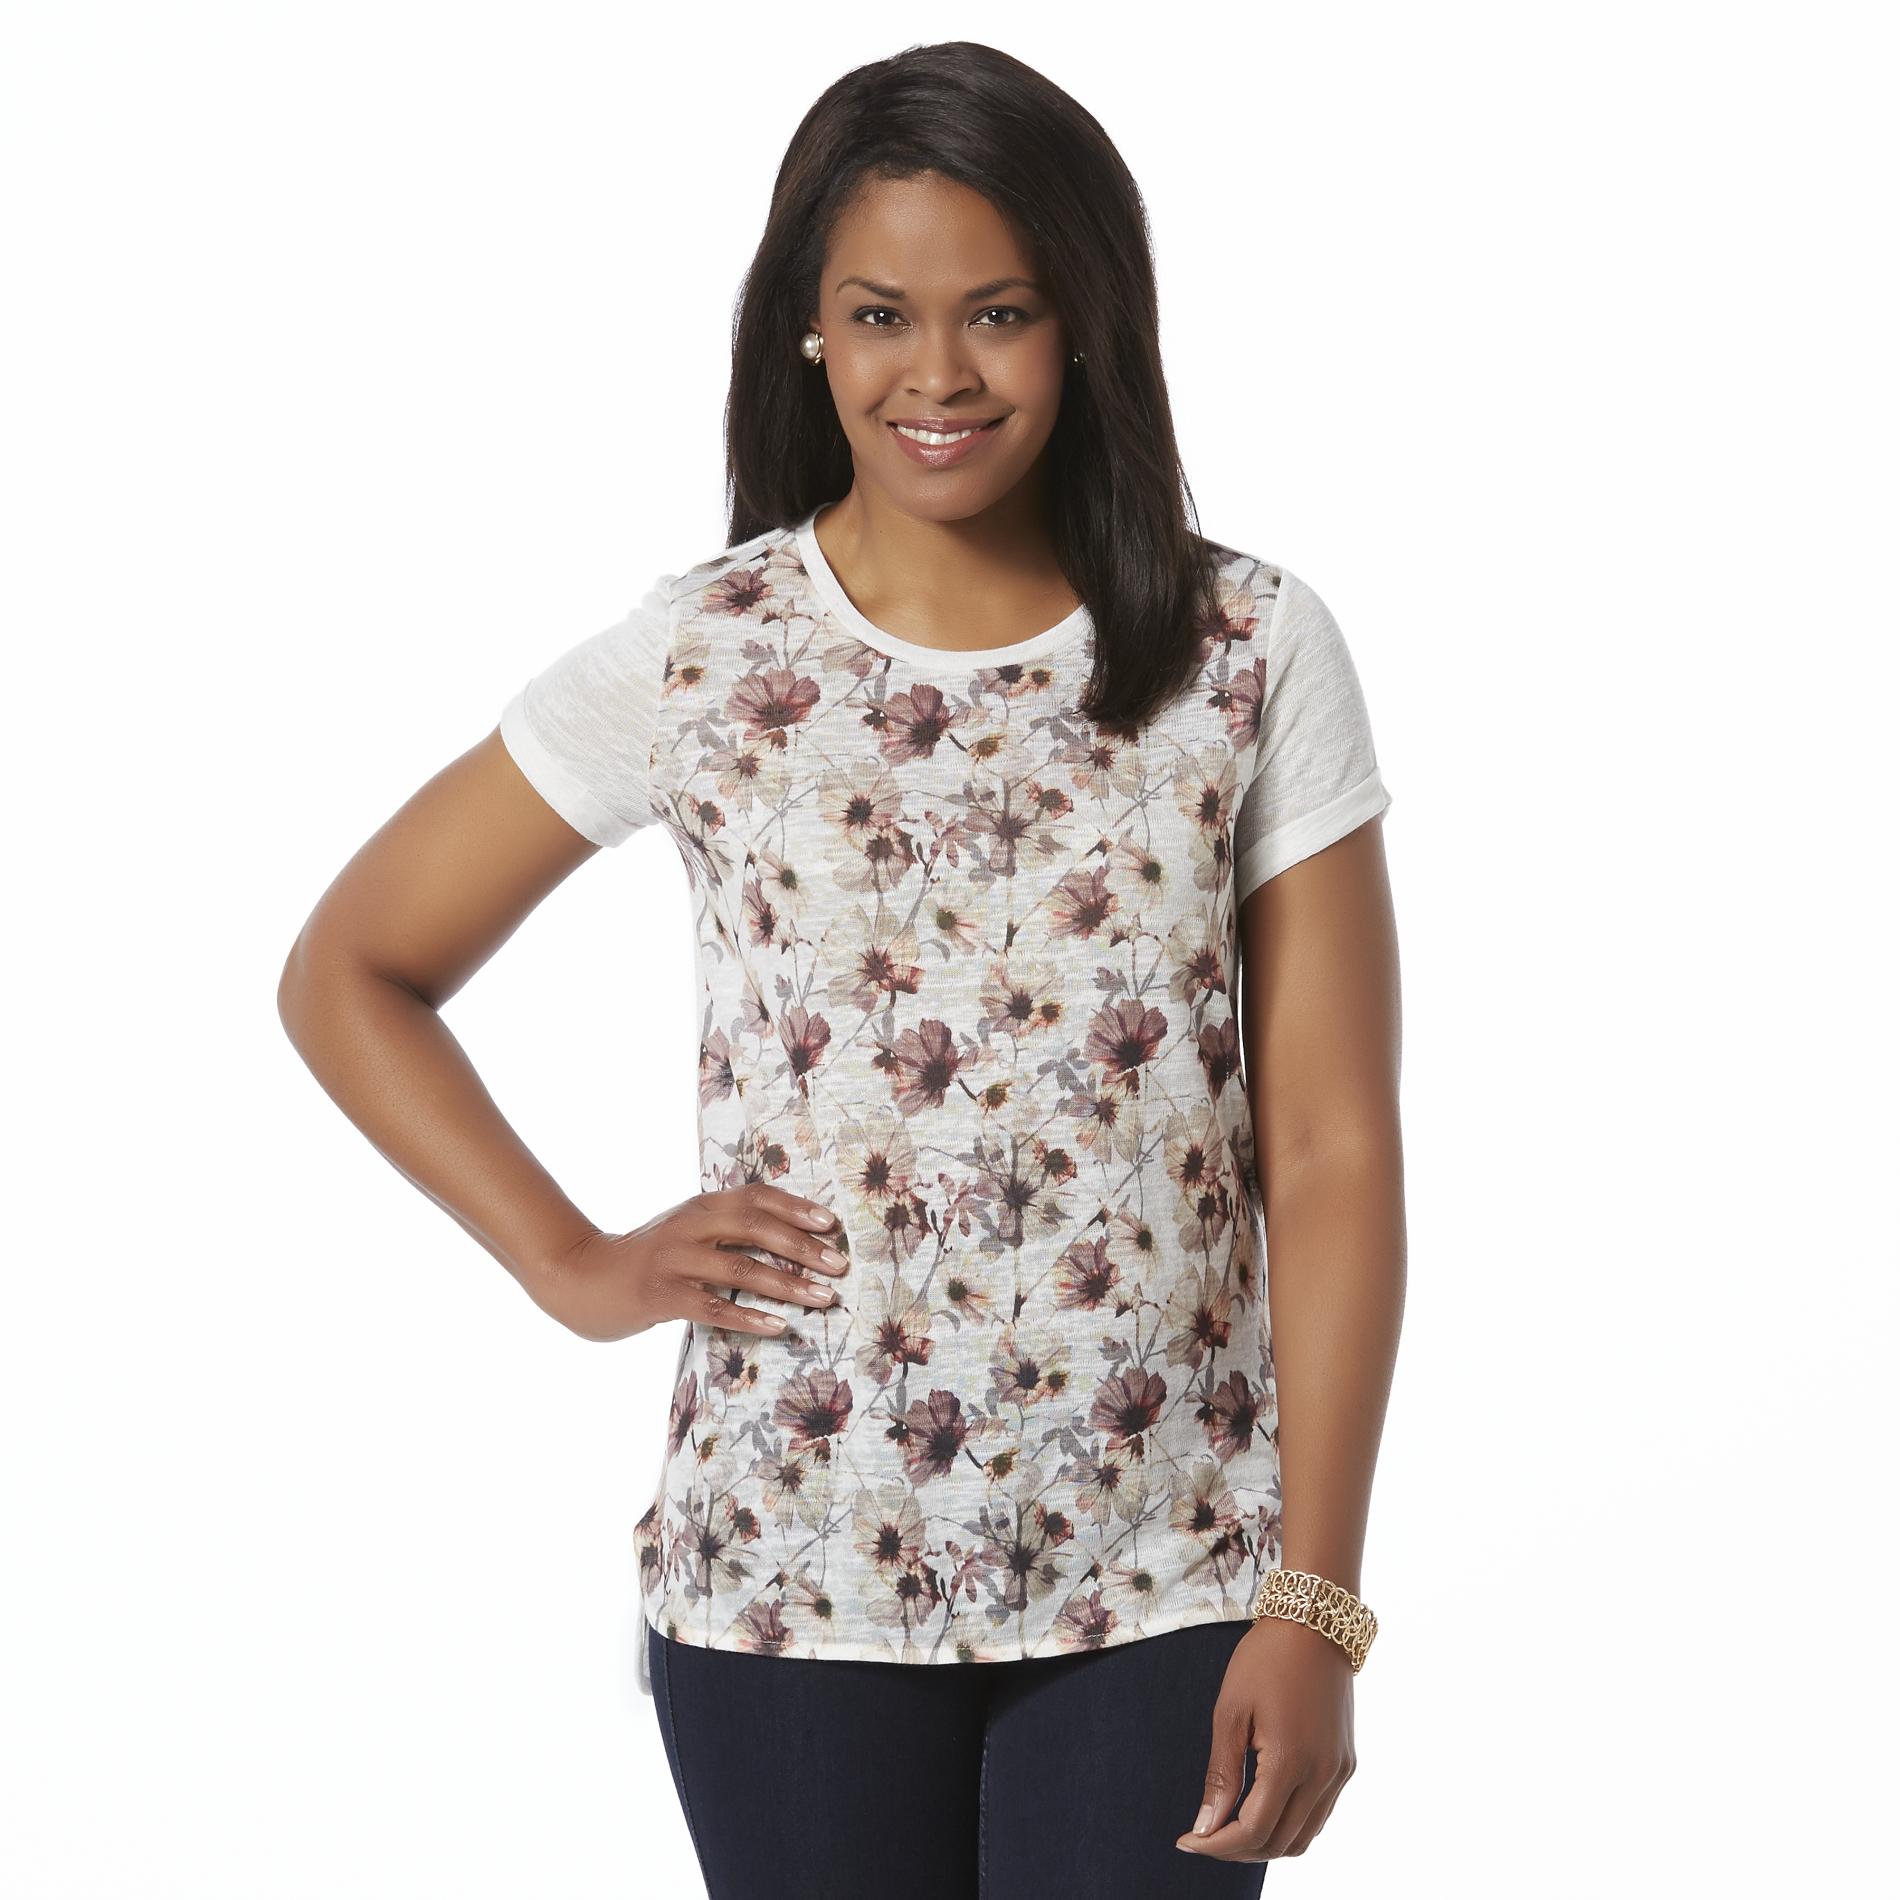 Basic Editions Women's Tunic Sweater - Floral Print